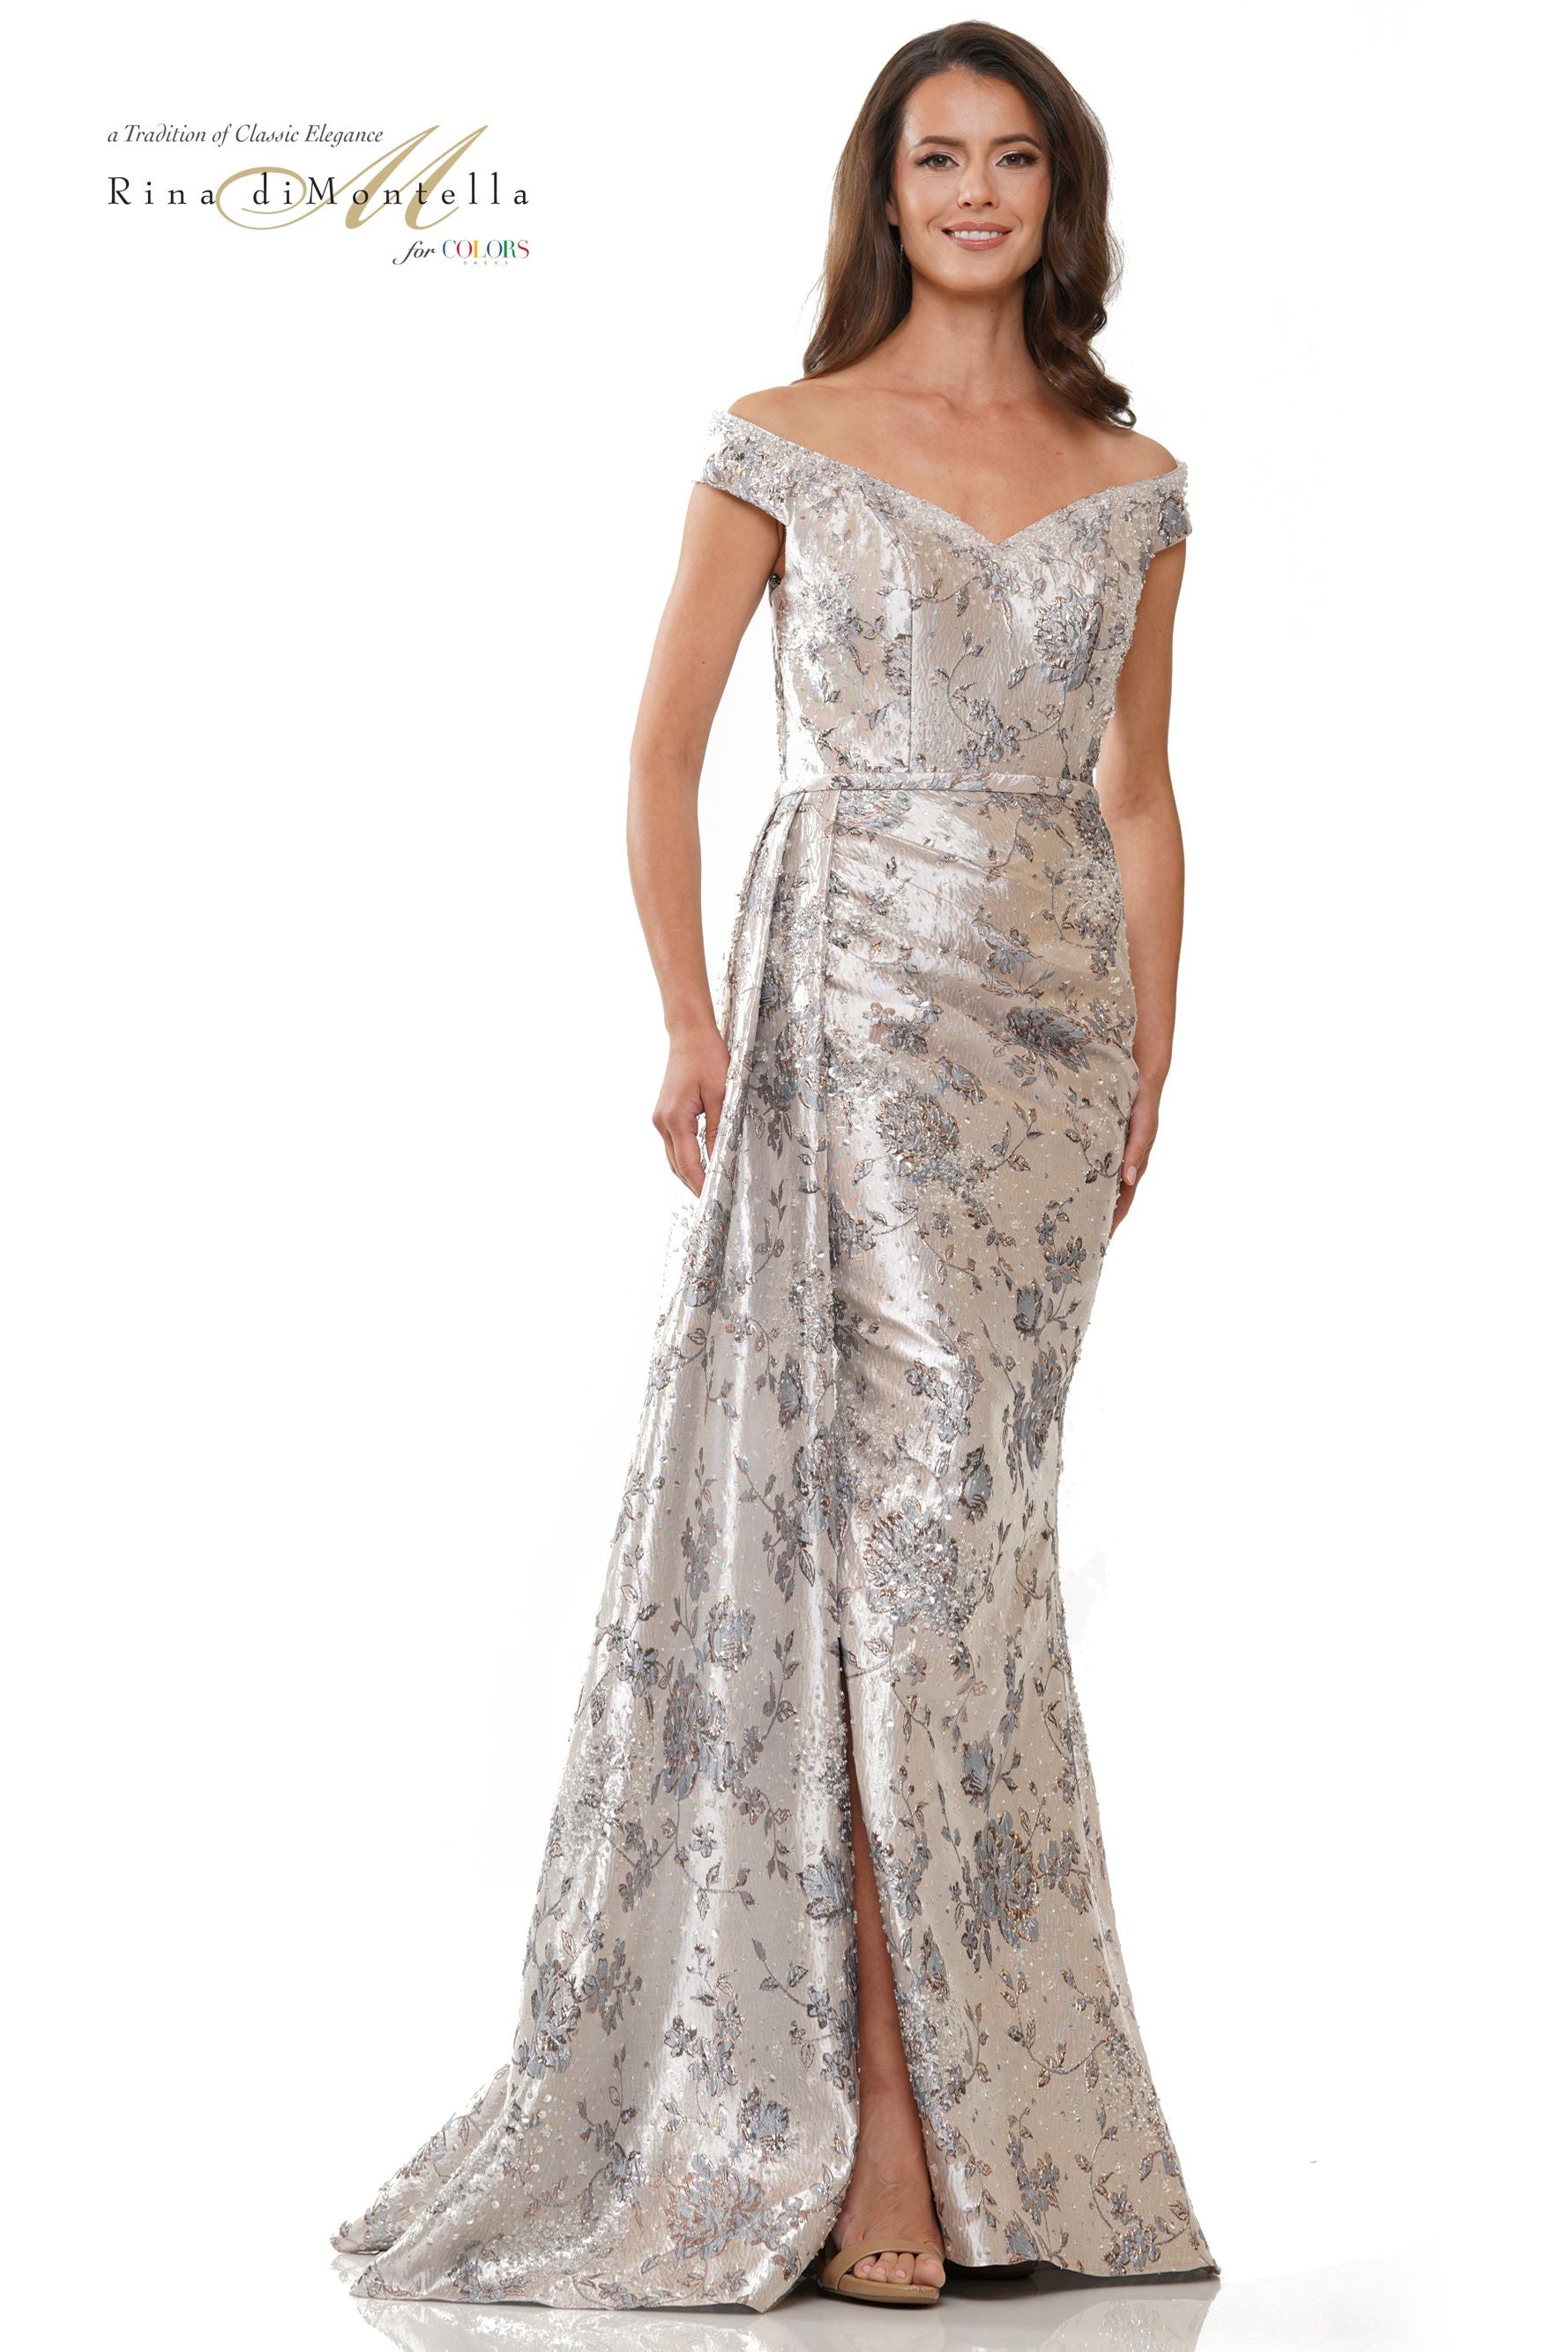 Rina Di Montella Fitted Long V-Neck Evening Dress -RD2912